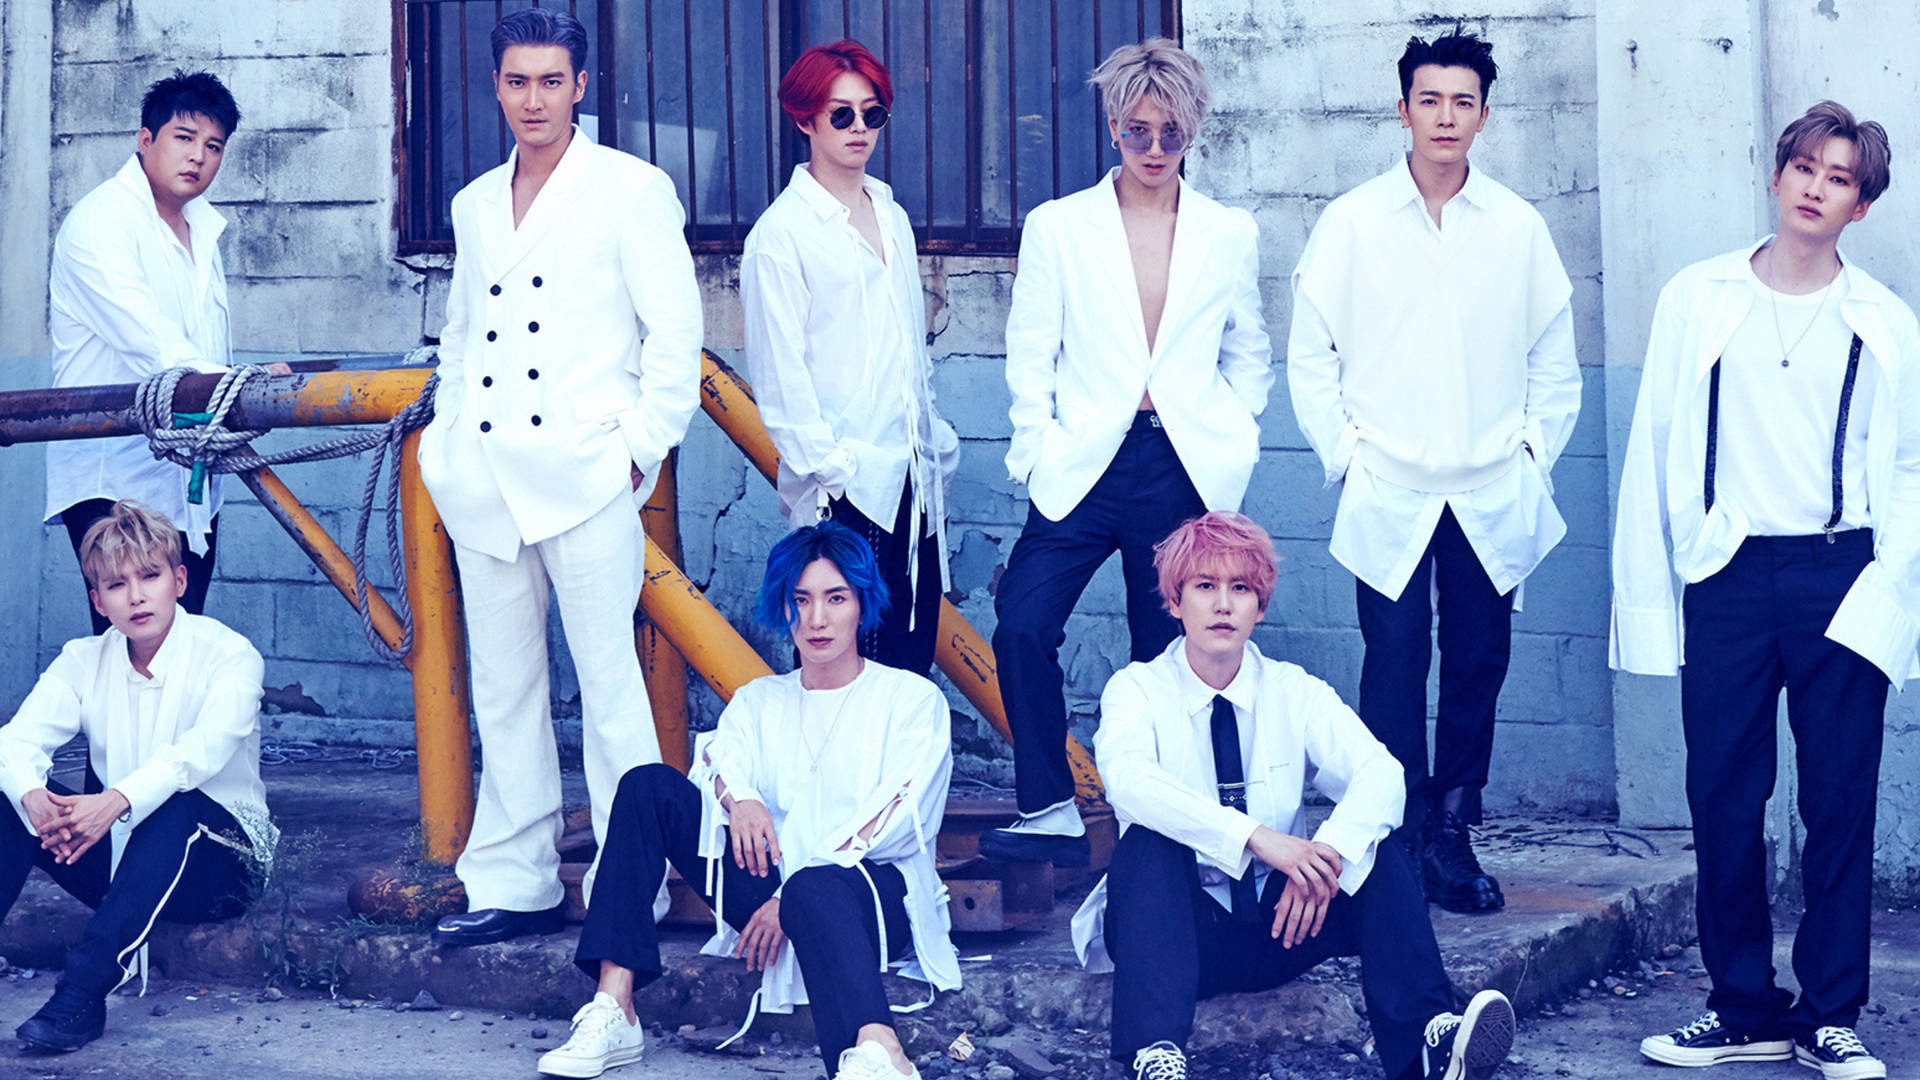 Super Junior in white outfits, High-quality wallpapers, Fashion inspiration, Stylish photos, 1920x1080 Full HD Desktop